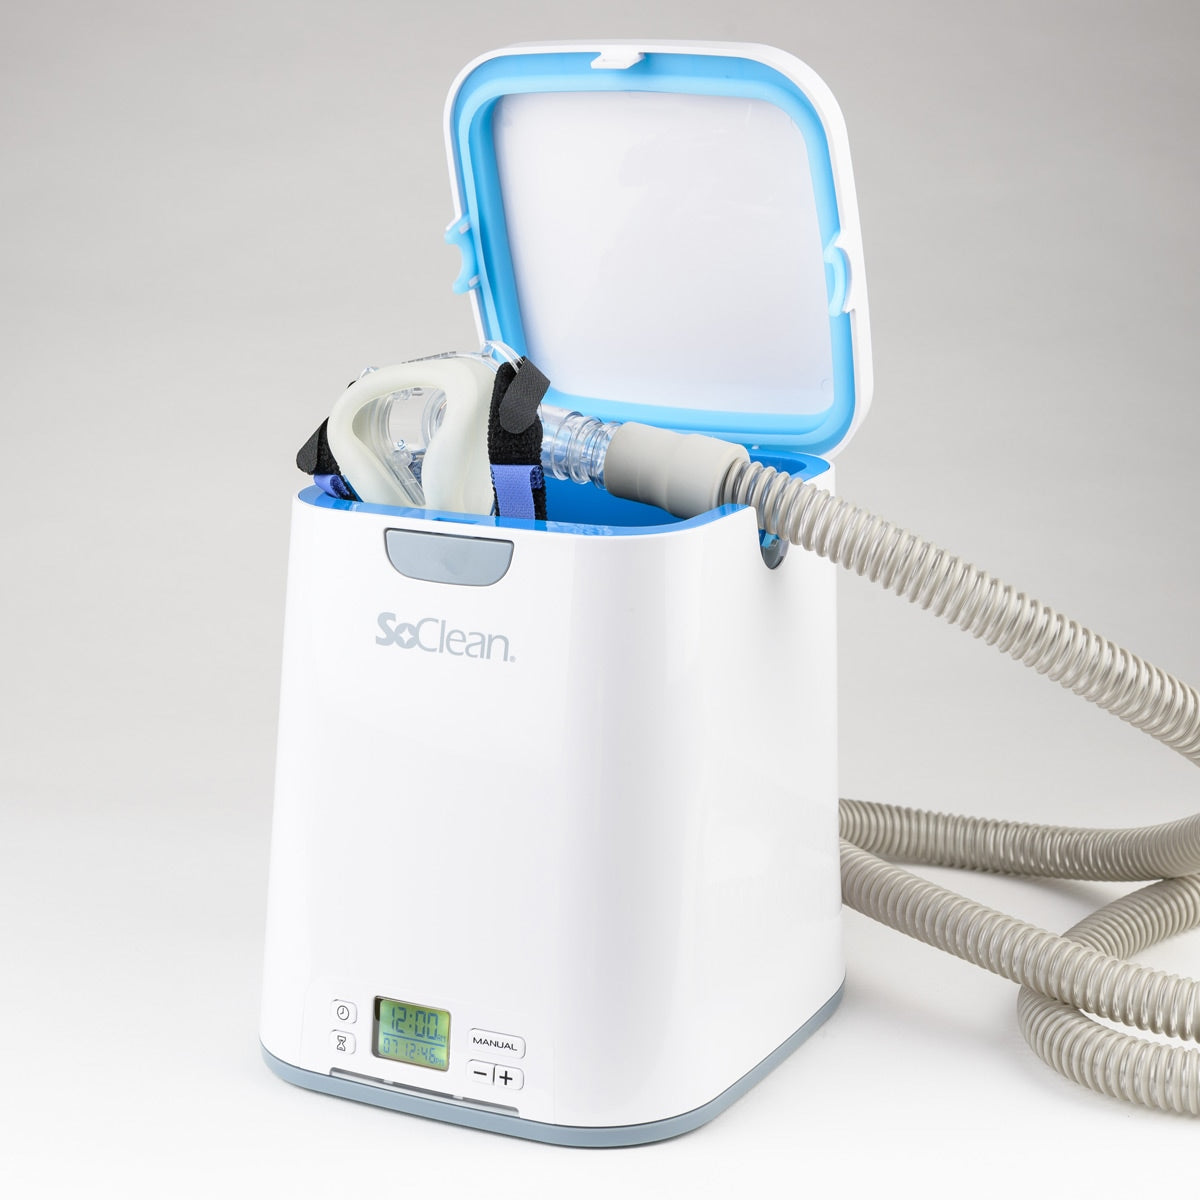 SoClean 2 CPAP/BiPAP Cleaner & Sanitizer - DISCONTINUED